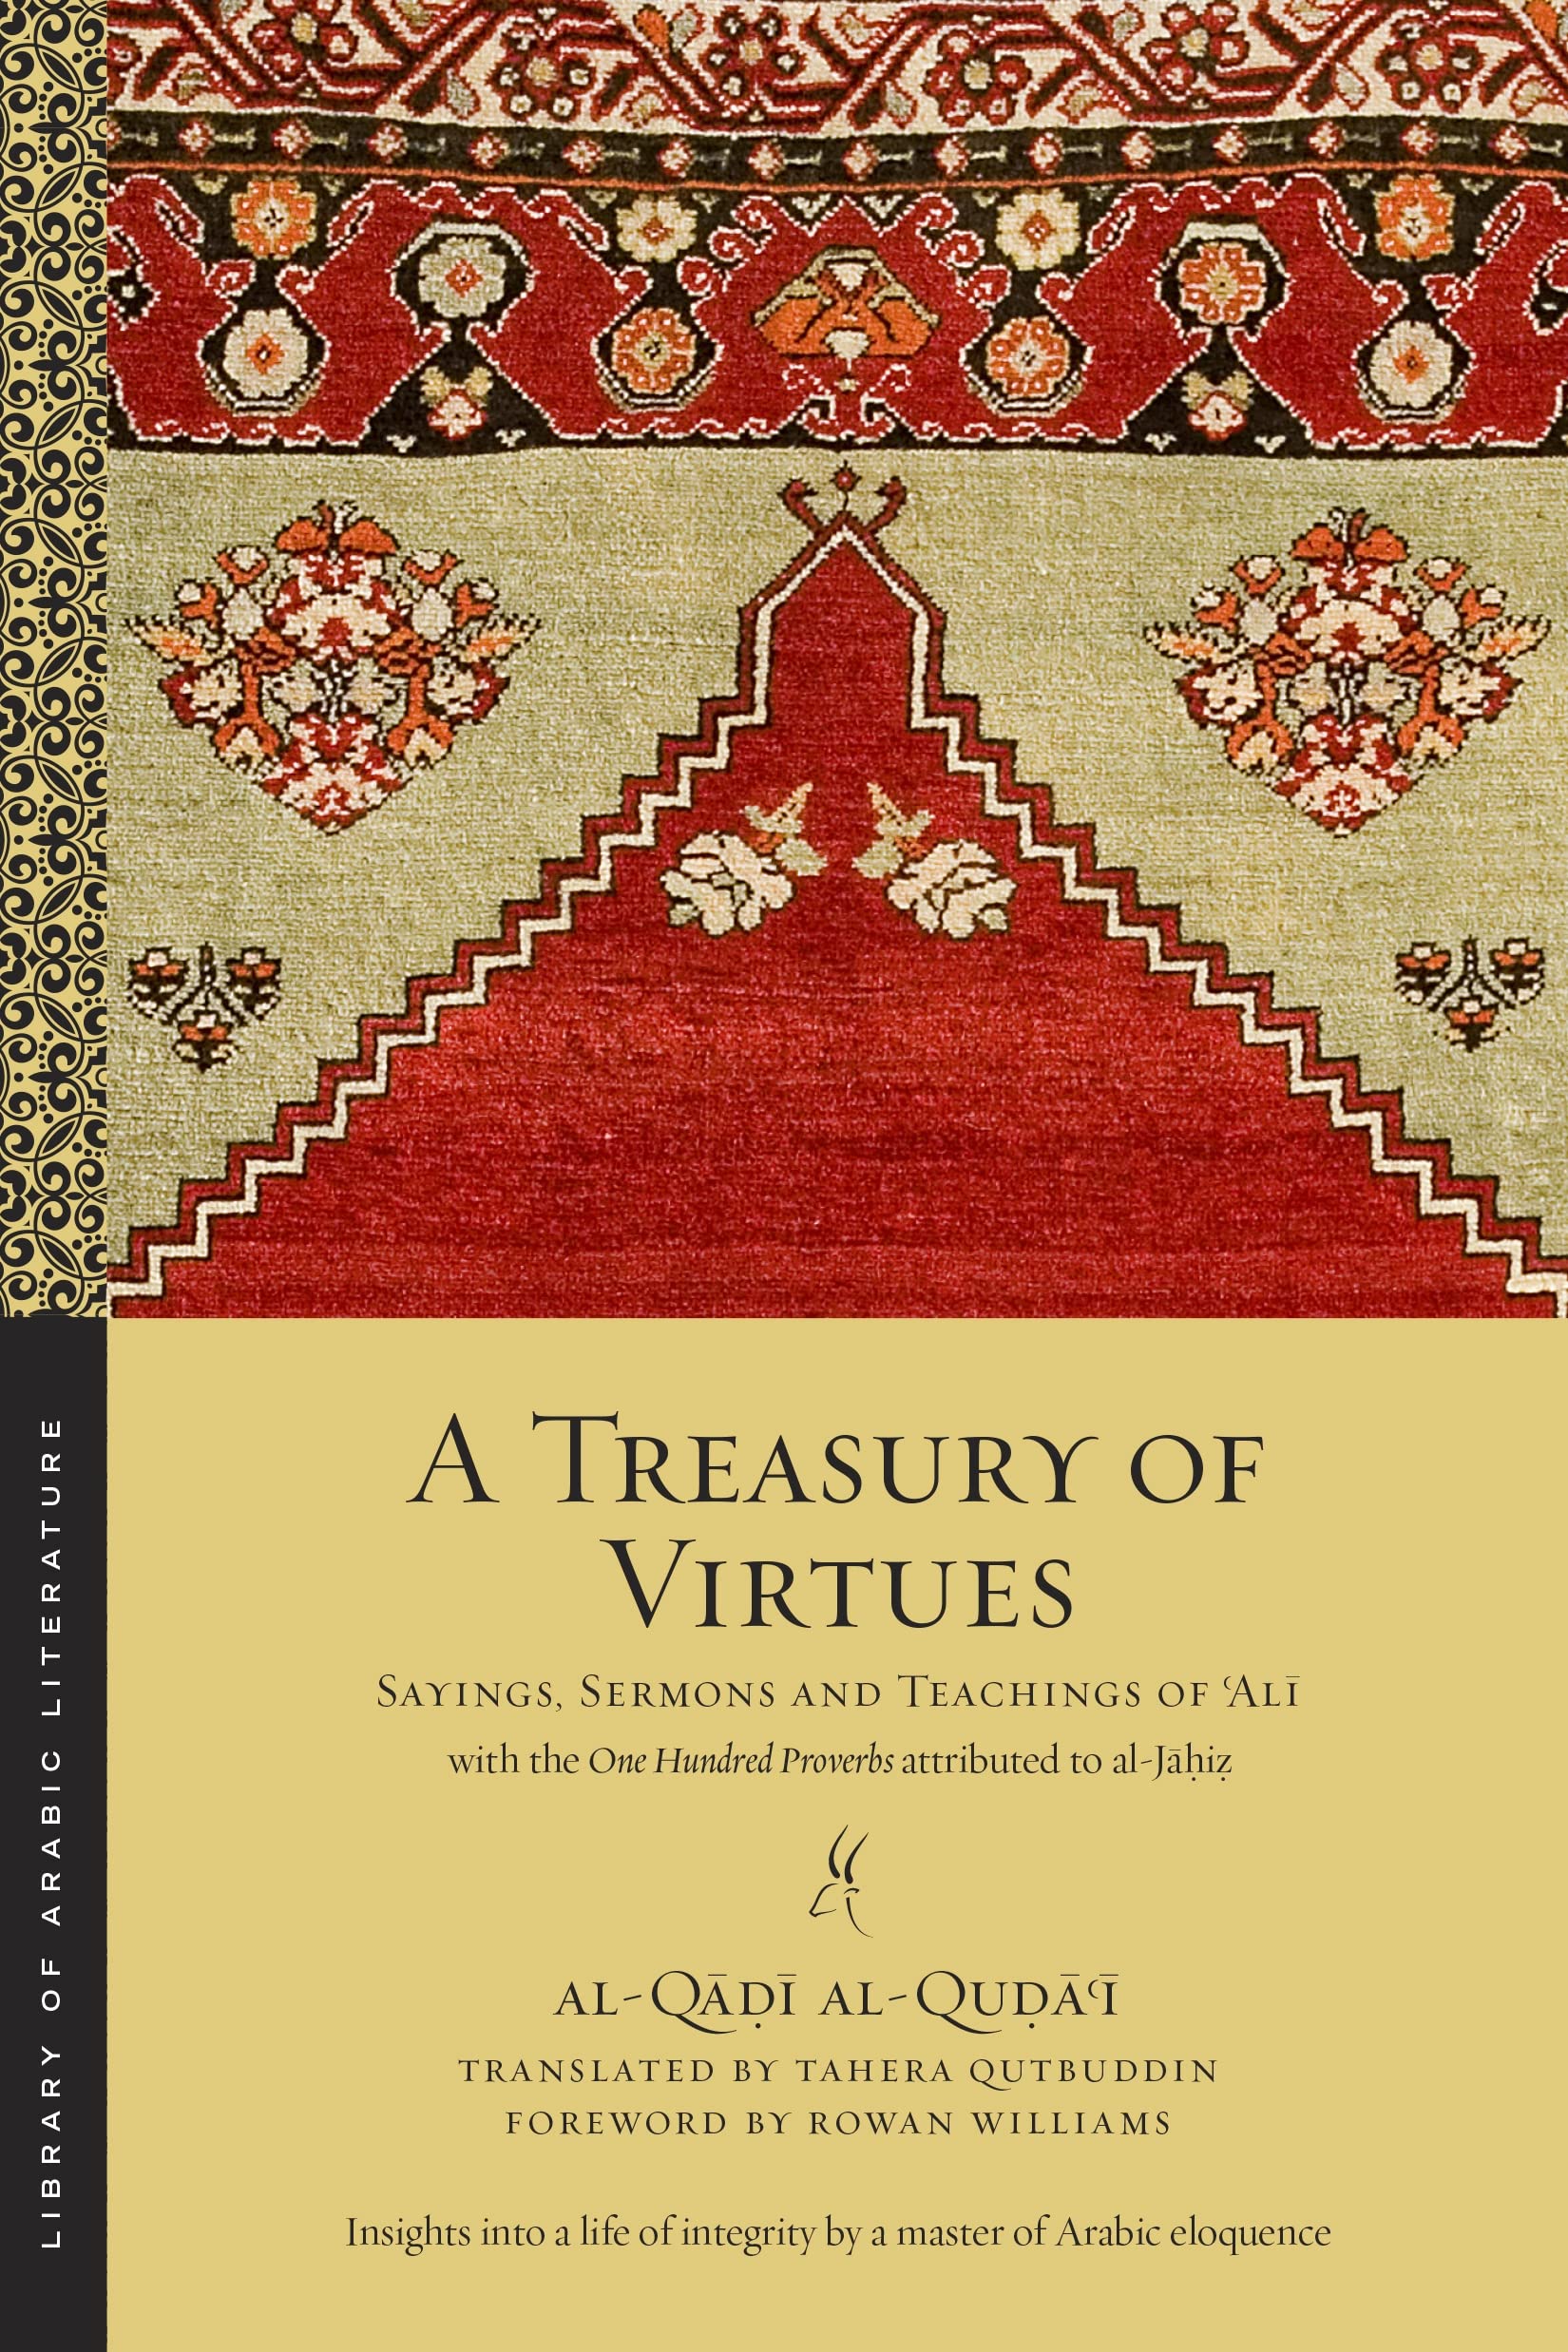 A Treasury of Virtues: Sayings, Sermons, and Teachings of 'Ali, with the One Hundred Proverbs attributed to al-Jahiz